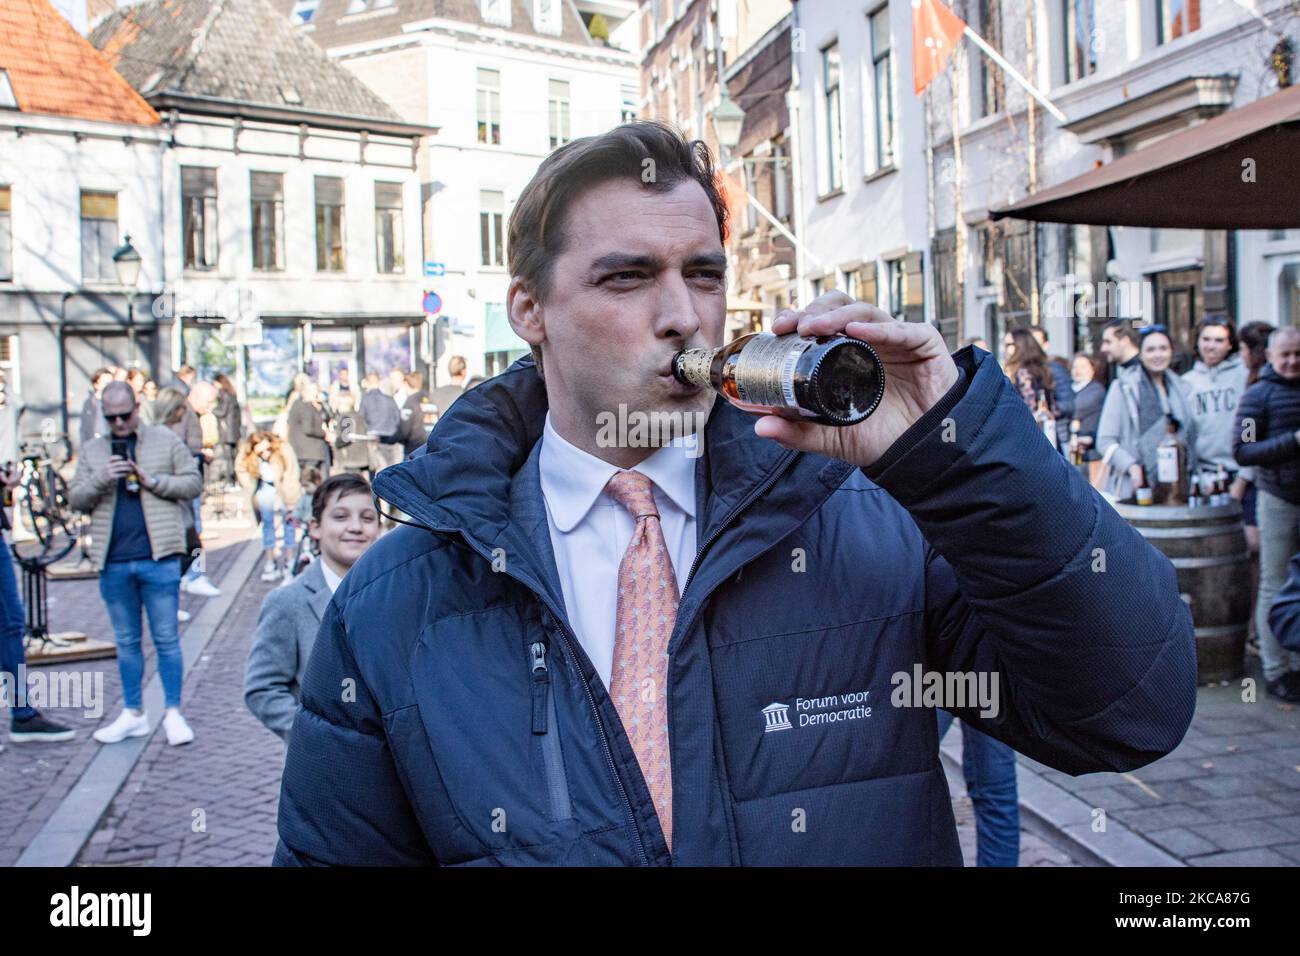 Thierry Baudet as seen drinking beer in Breda city during an anti-lockdown protest against the safety measures that the Dutch government imposed to fight the spread of the Covid-19 Coronavirus Pandemic. Thierry Henri Philippe Baudet is a Dutch politician and author, founder and leader of Forum for Democracy in Dutch Forum voor Democratie, FvD a conservative right-wing populist political party, leader of the party in the parliament, and member of the House of Representatives. Breda, the Netherlands on March 2, 2021 (Photo by Nicolas Economou/NurPhoto) Stock Photo